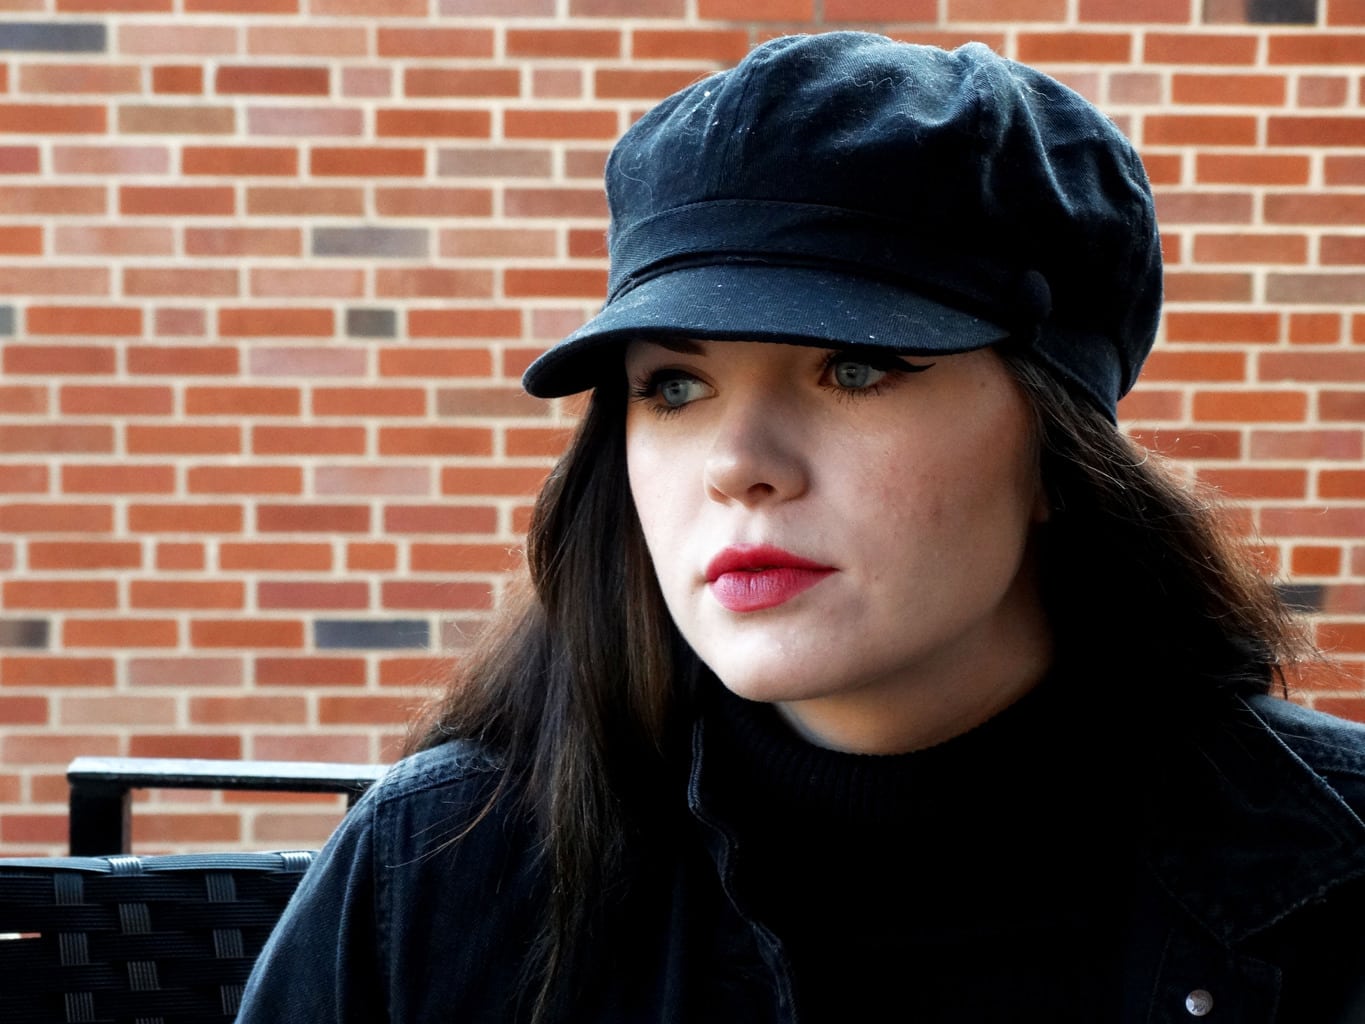 Mackenzie wears a black cabby hat with dramatic cat eyeliner and a bold pink lip.